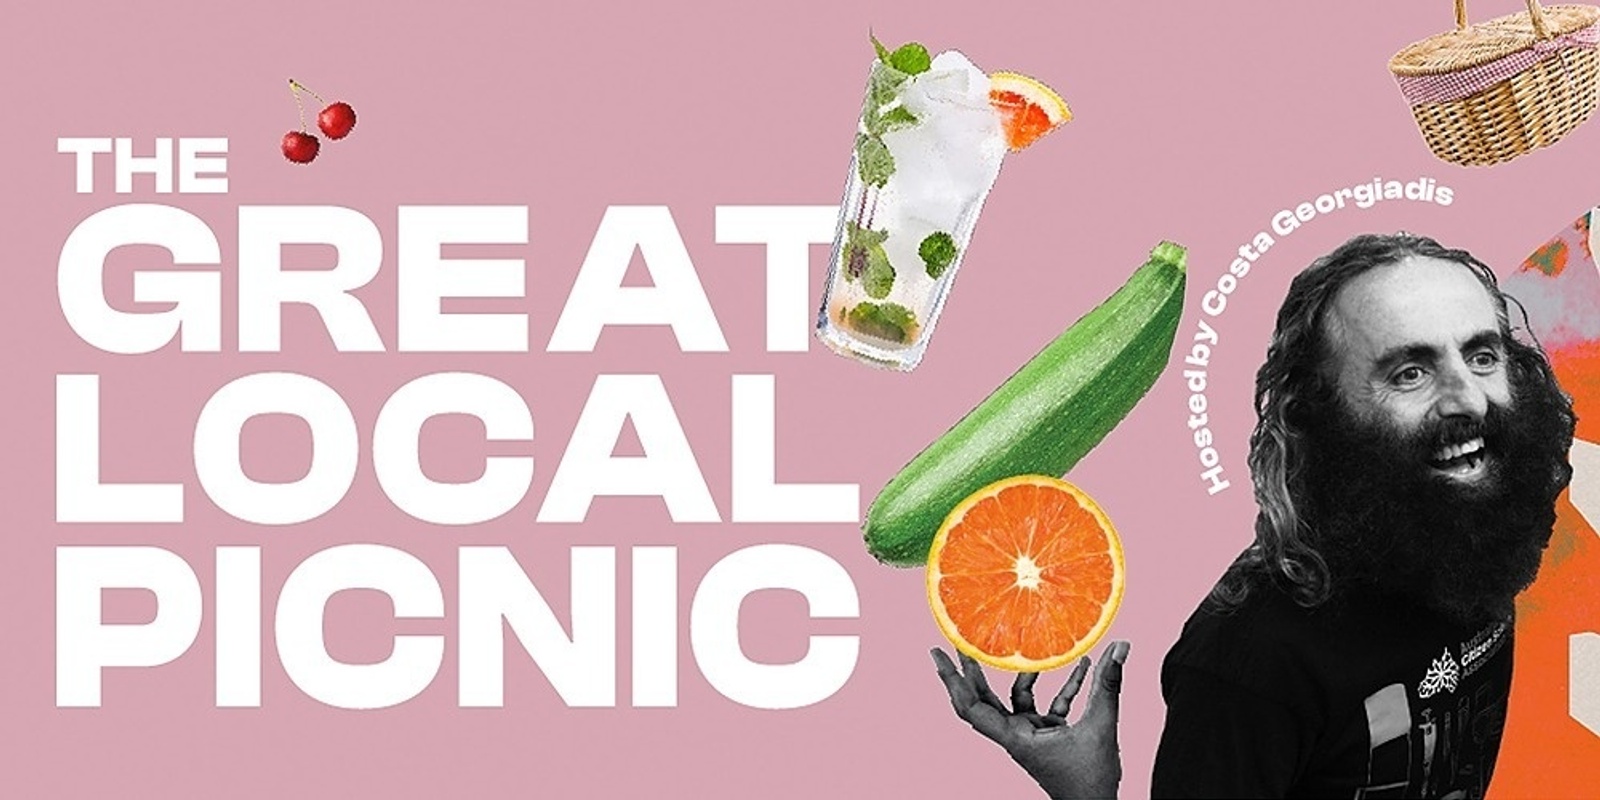 Banner image for The Great Local Picnic